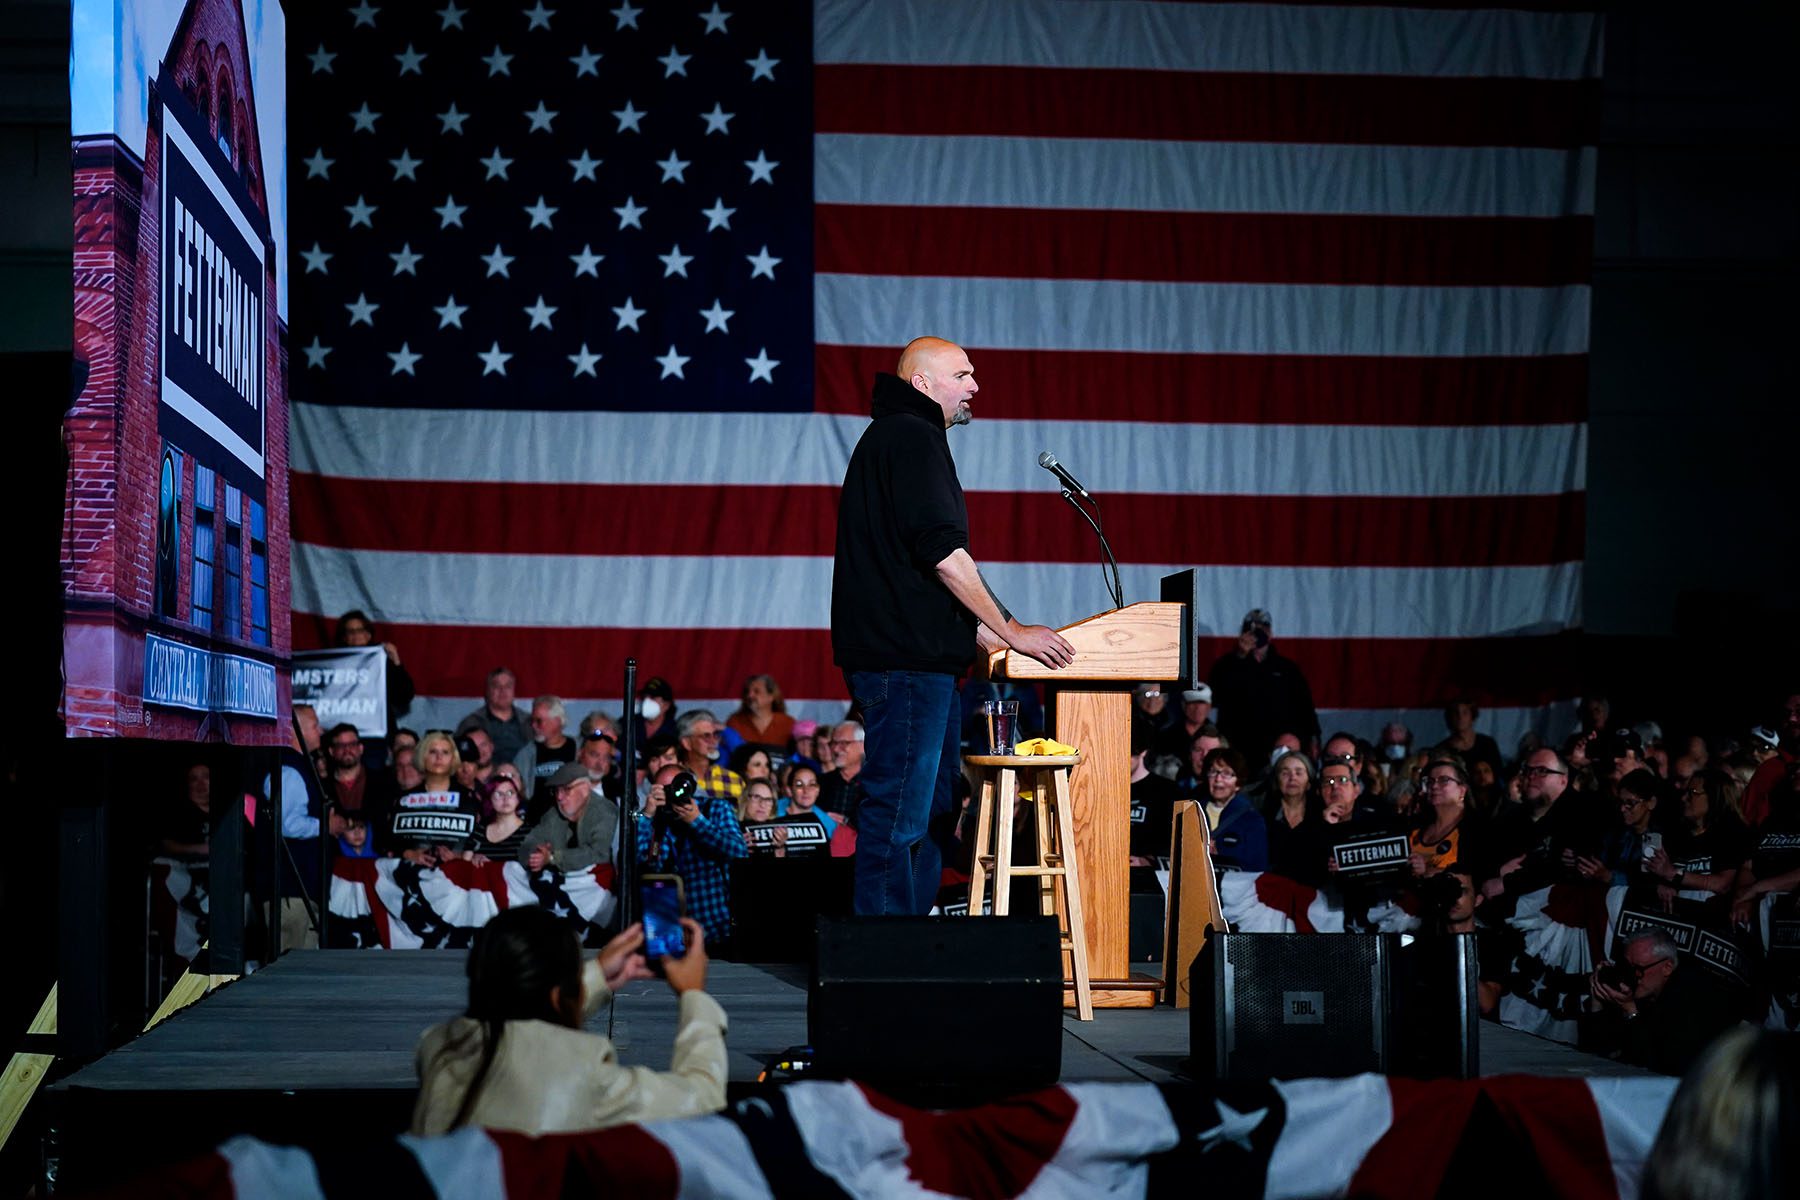 John Fetterman stands at a podium surrounded by supporters during a campaign event.